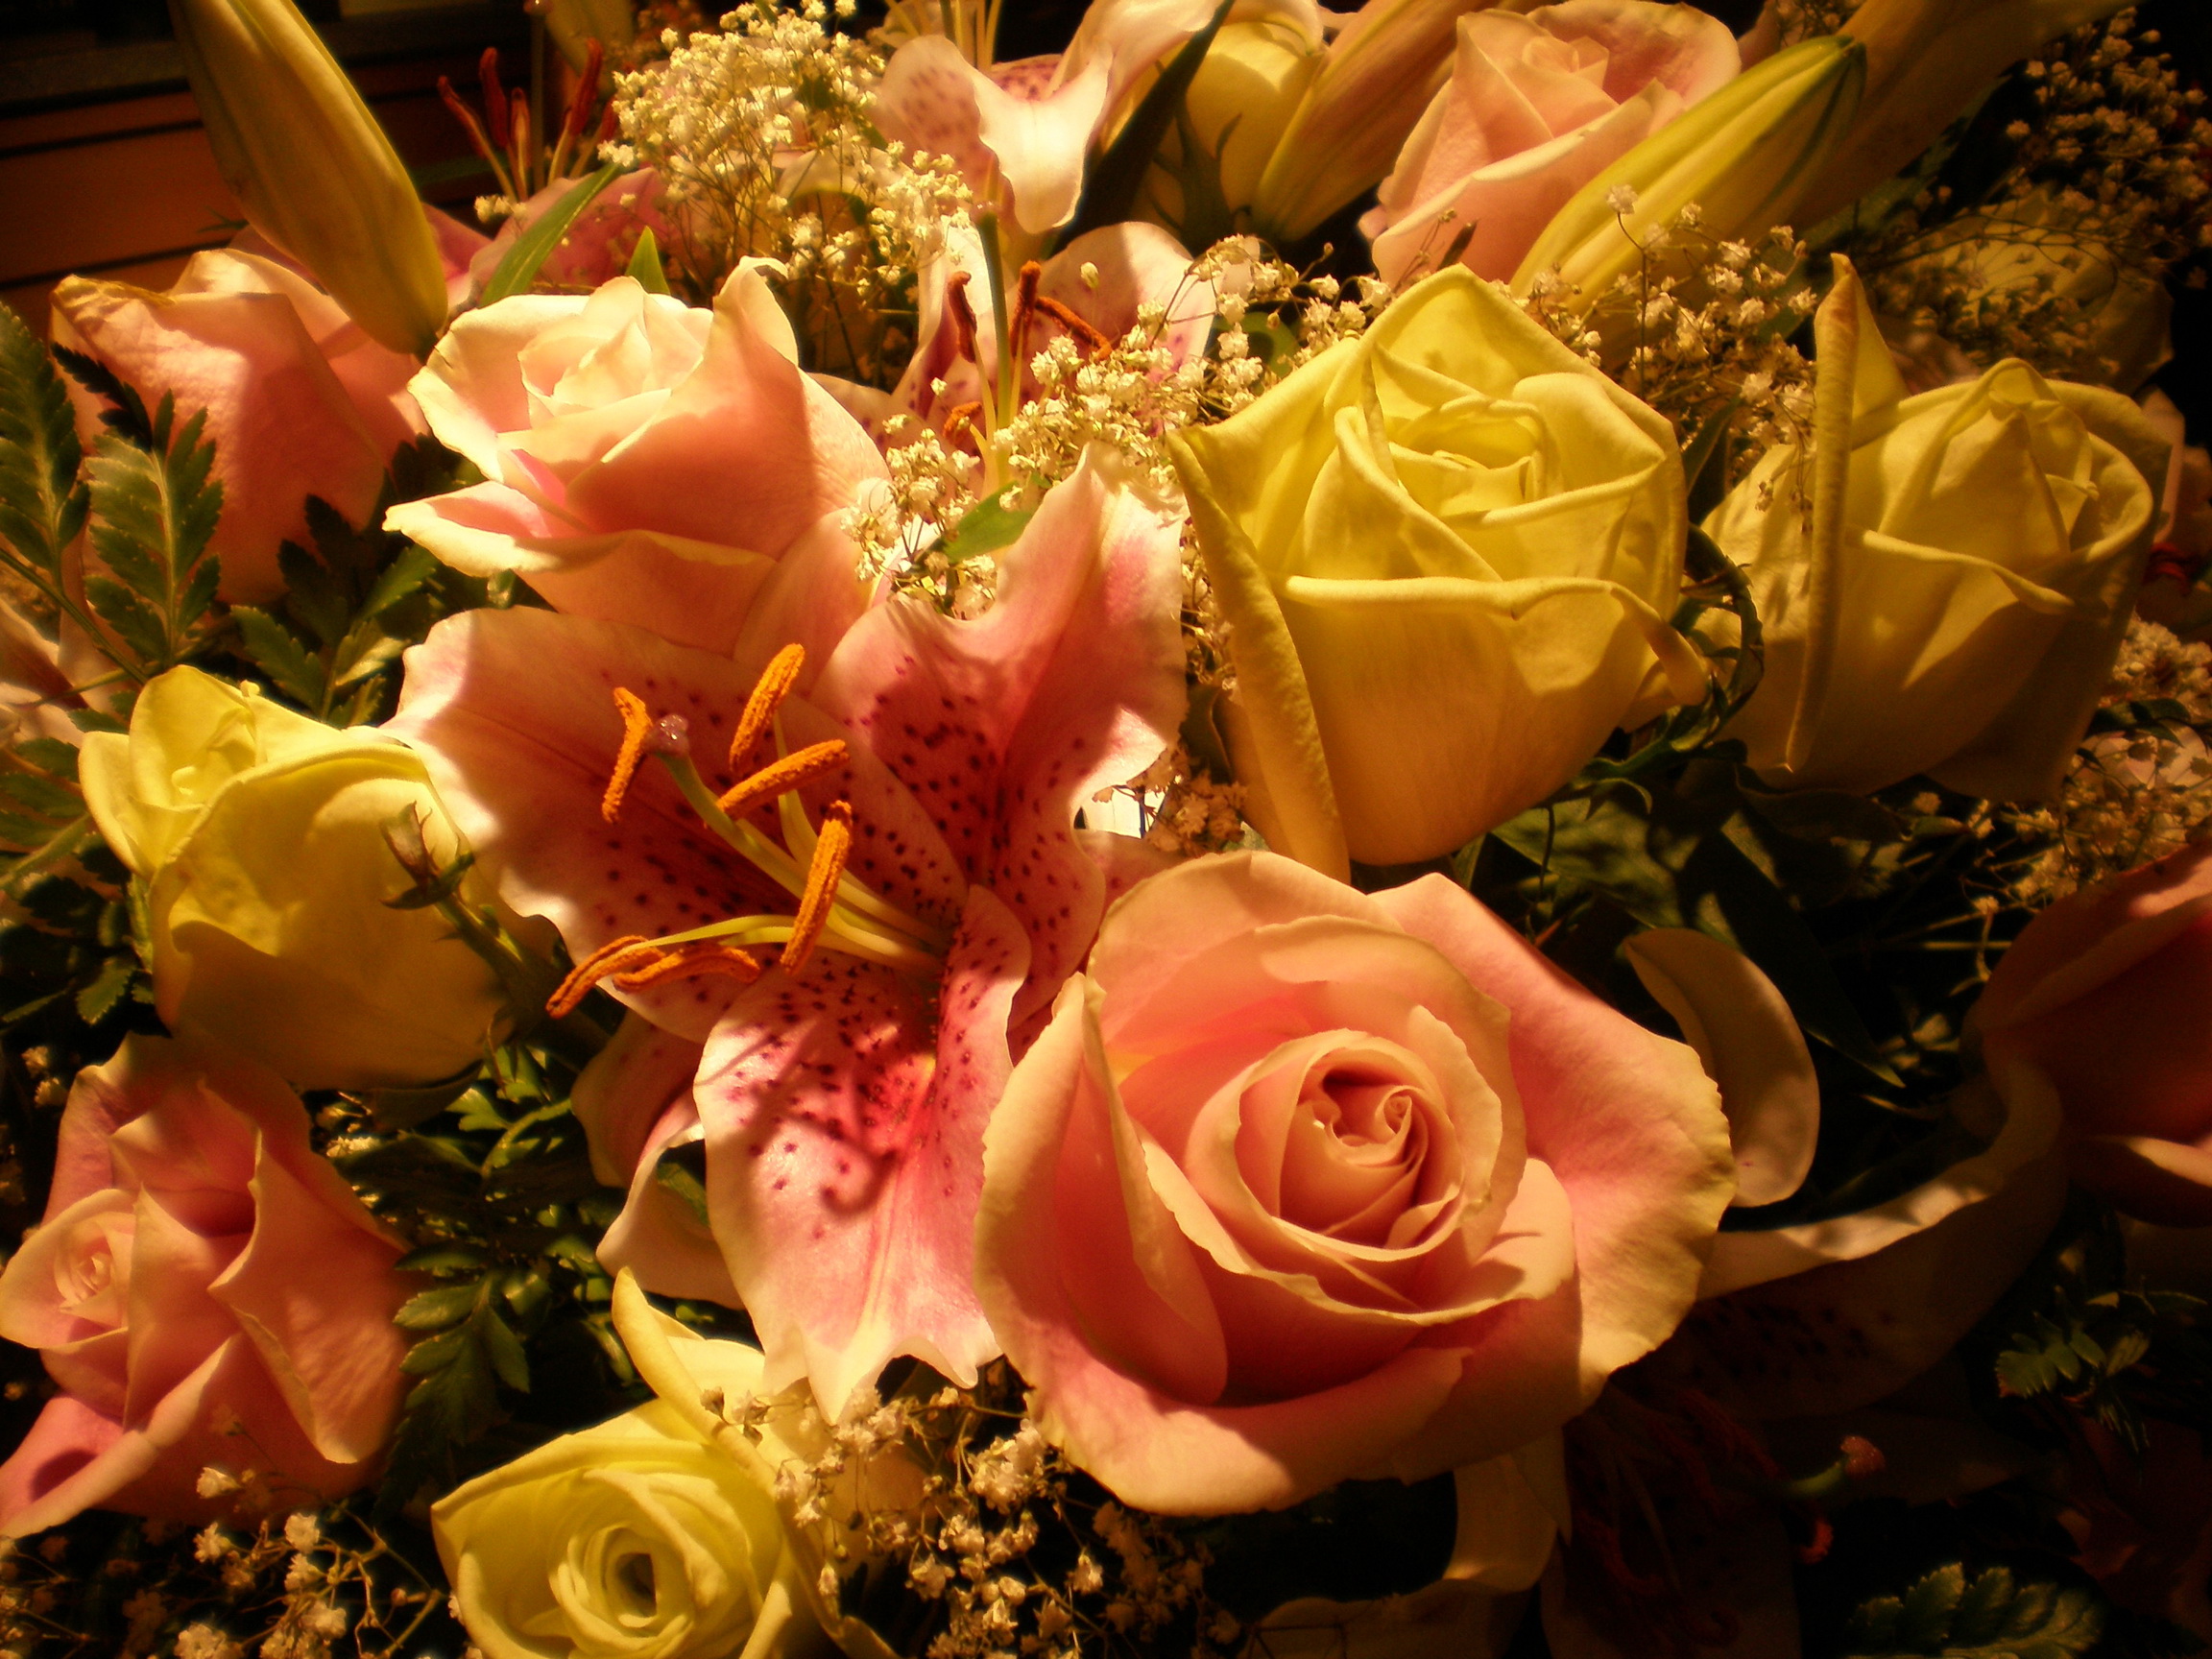 bouquets, Roses, Flowers Wallpaper